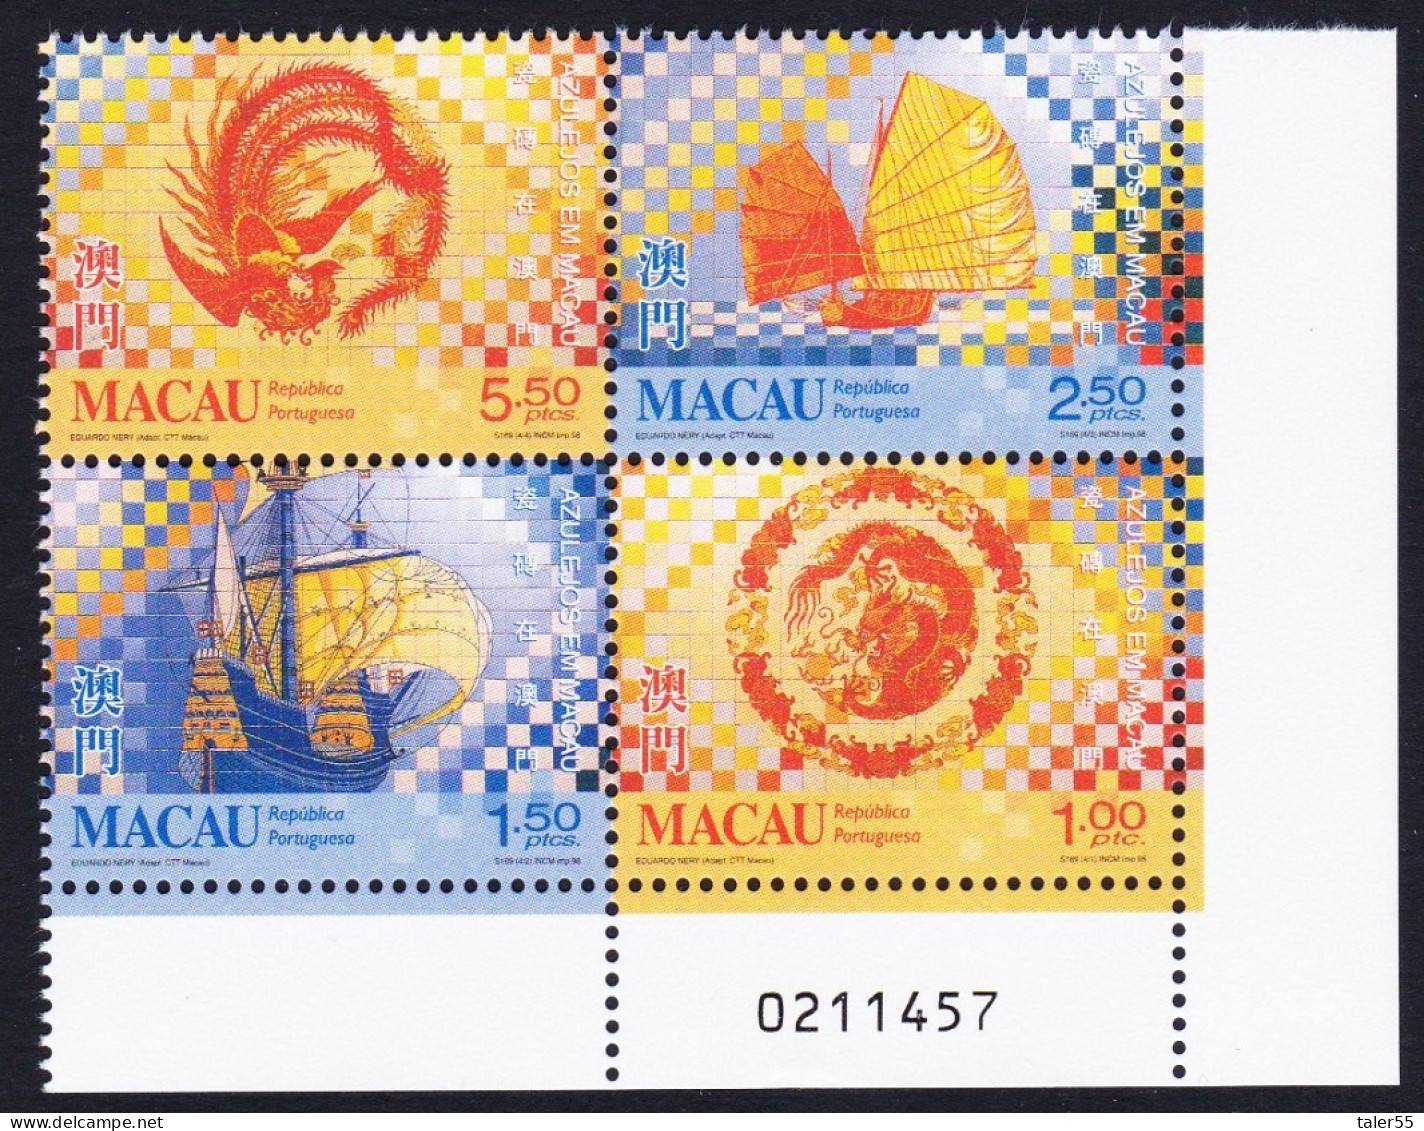 Macao Macau Tiles From Macao Block Of 4 Control Number 1998 MNH SG#1076-1079 Sc#965a - Unused Stamps